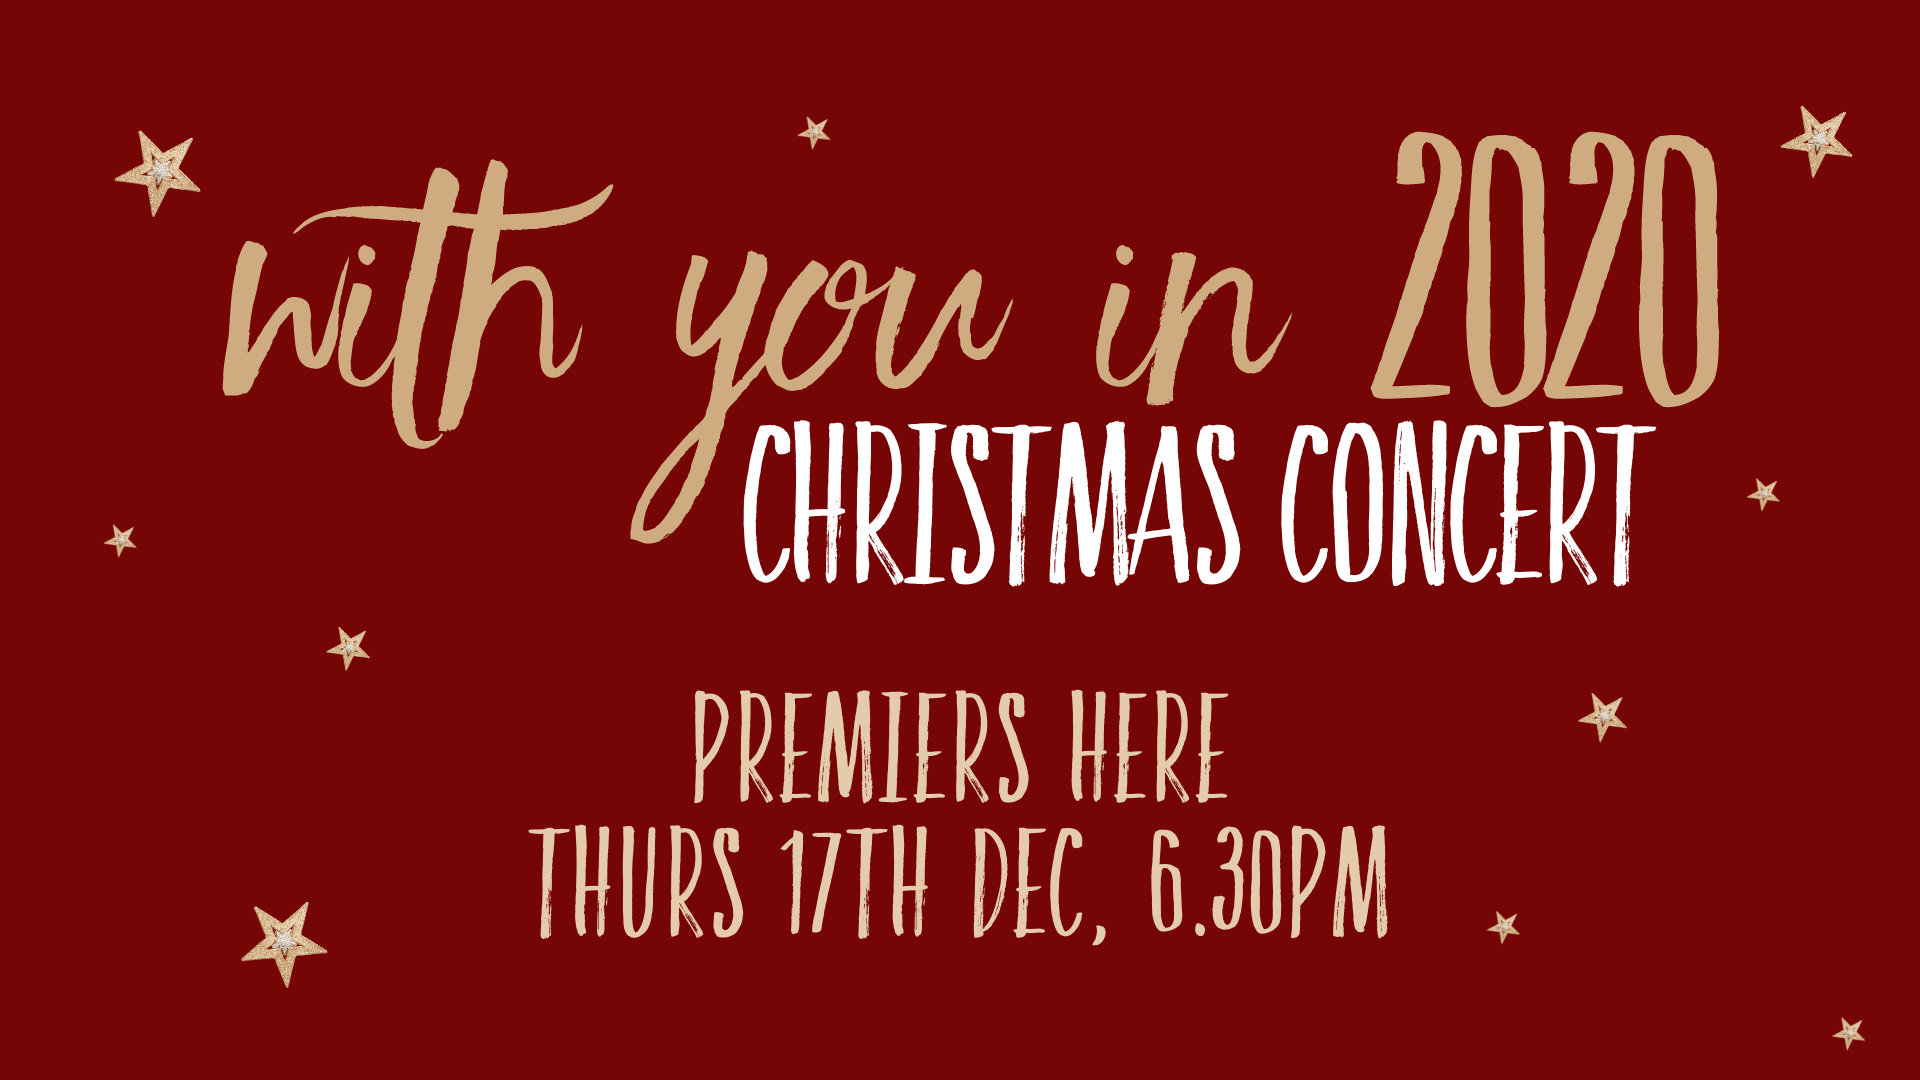 Christmas Concert poster: with you in 2020 premiers here Thurs 17th Dec, 6:30pm